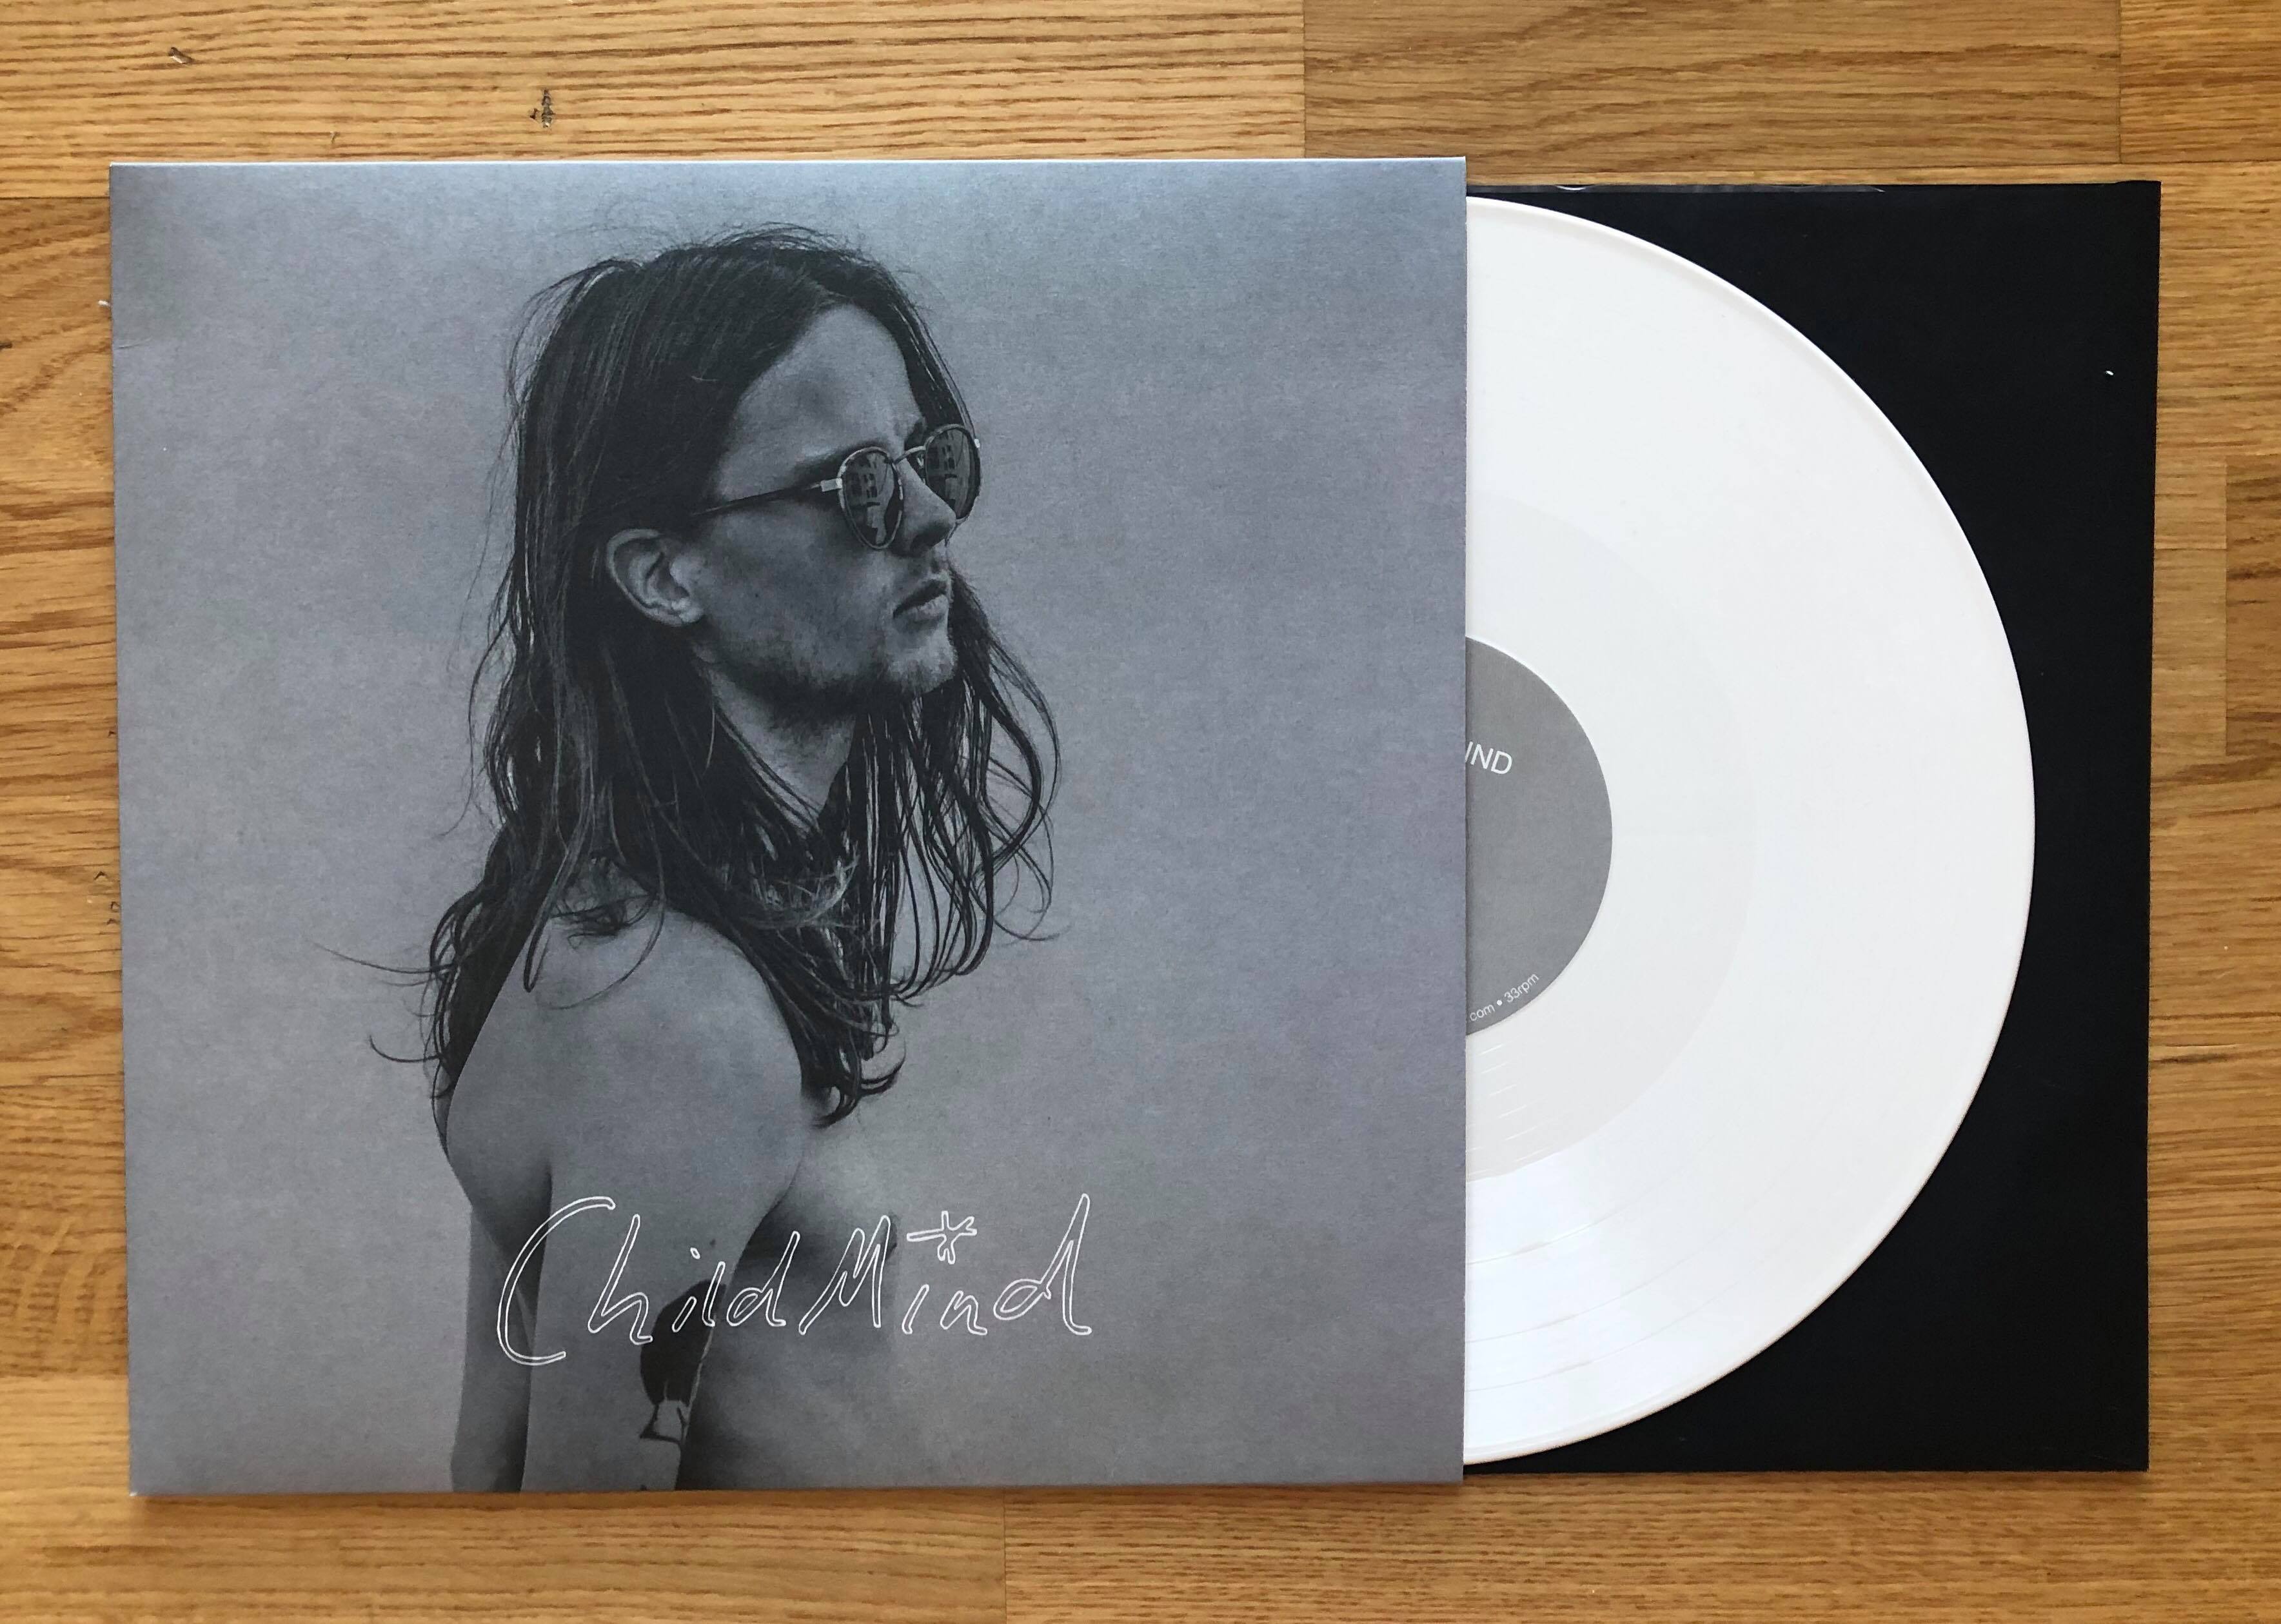 Childmind - debut LP - photo on table